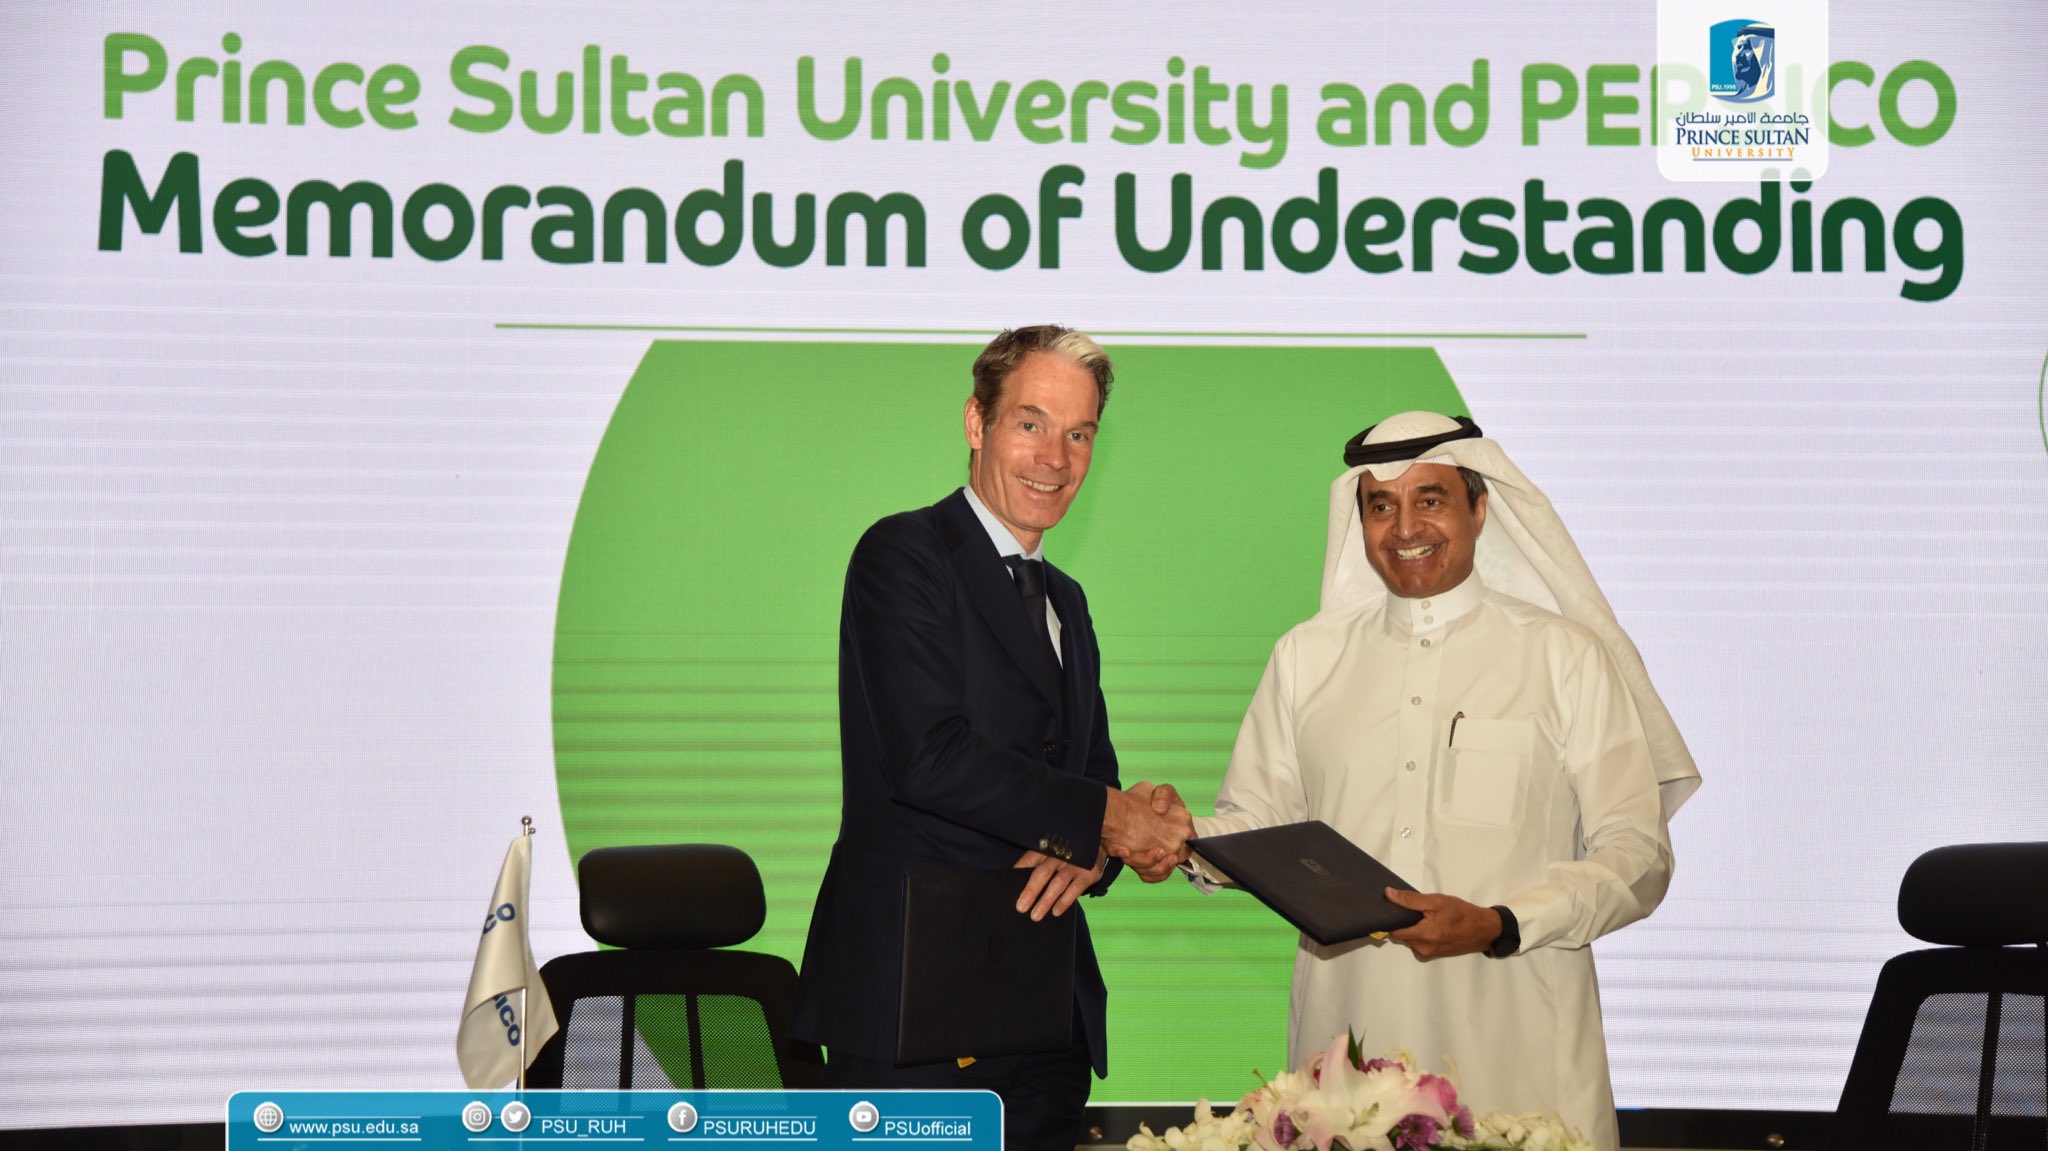 PepsiCo partners with Prince Sultan University to educate youth on sustainability